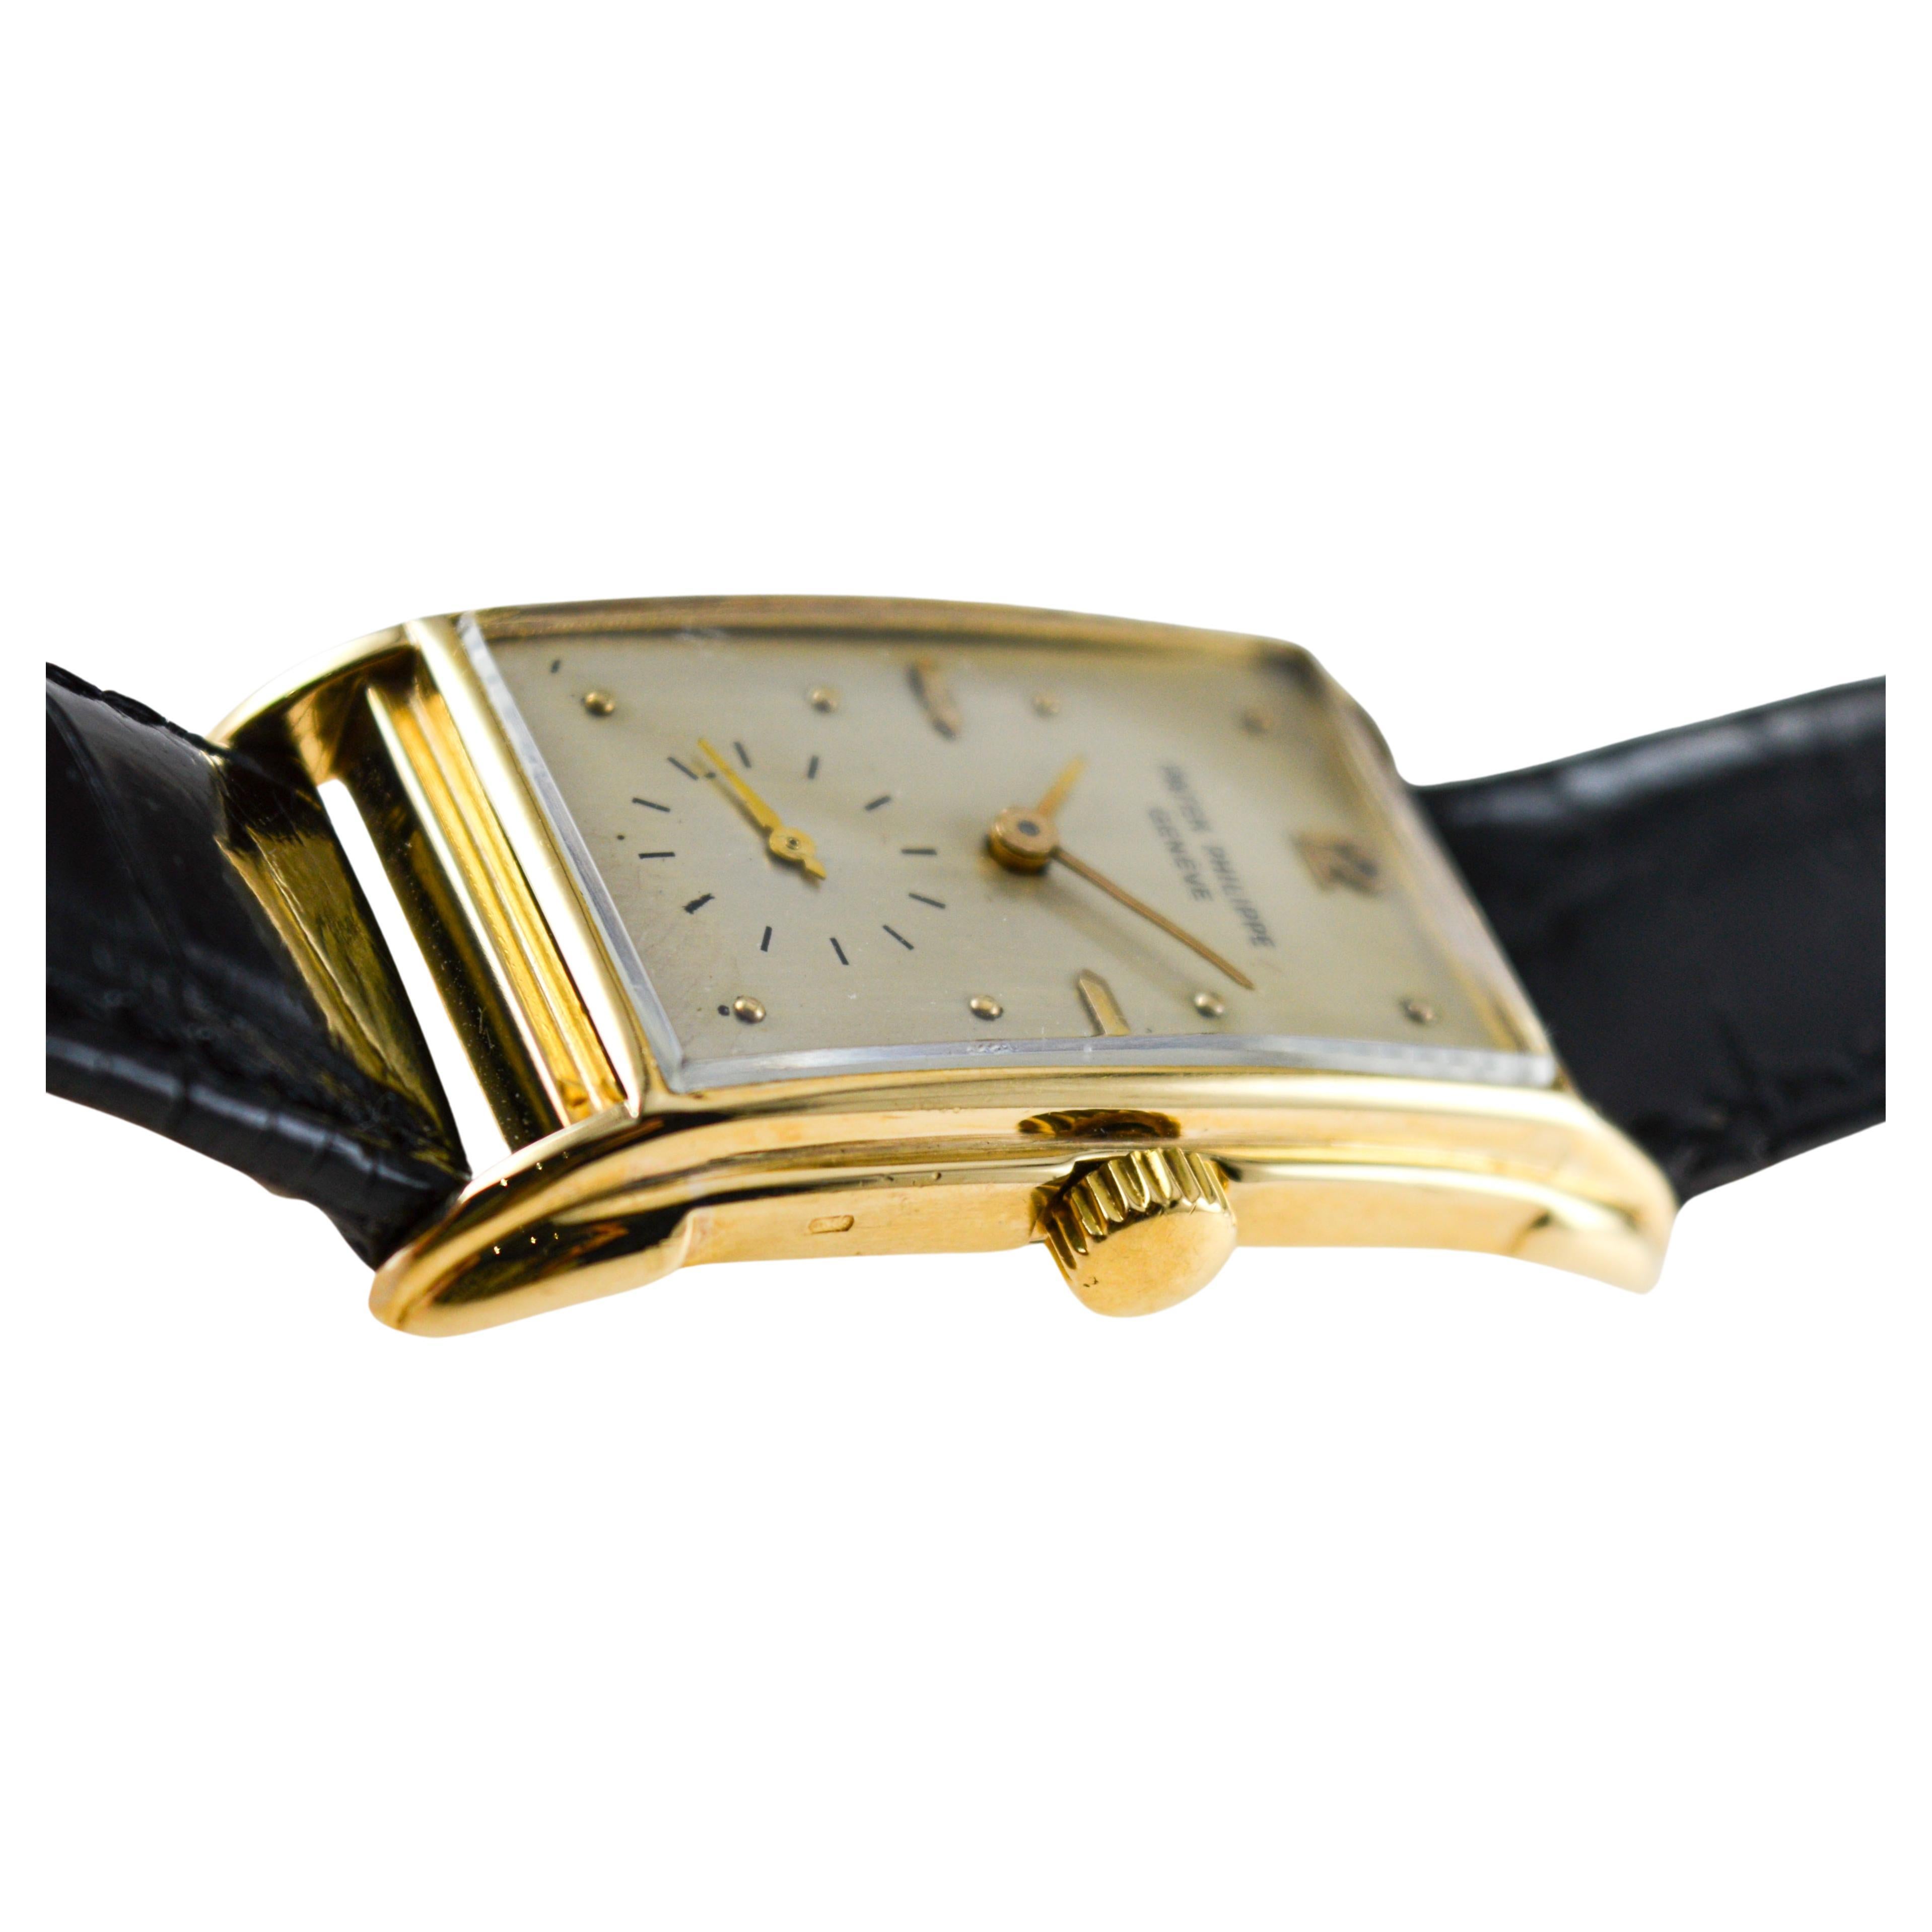 Patek Philippe Yellow Gold Art Deco Style Manual Watch, circa 1948 with Archival For Sale 7